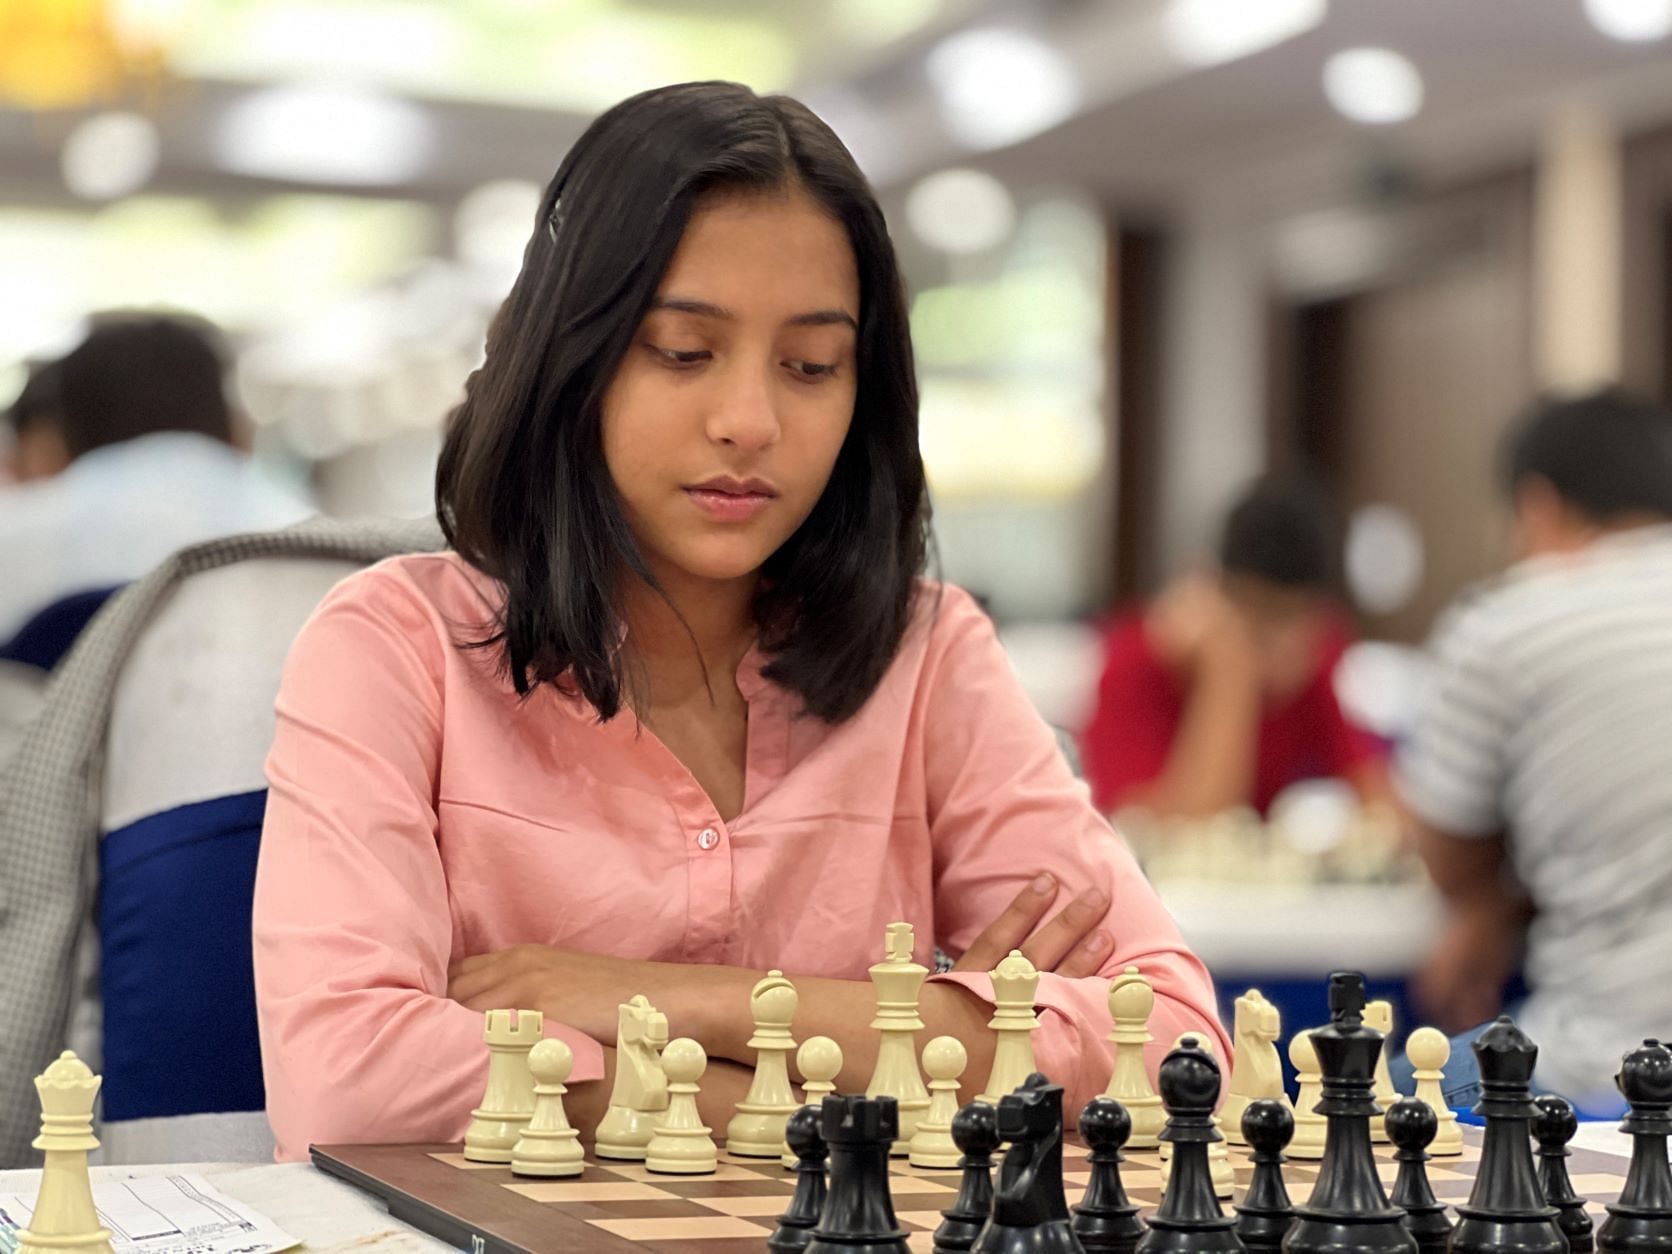 Nagpur&rsquo;s 15-year-old Divya Deshmukh will be part of the Indian women&#039;s chess team. (Pic credit: AICF)